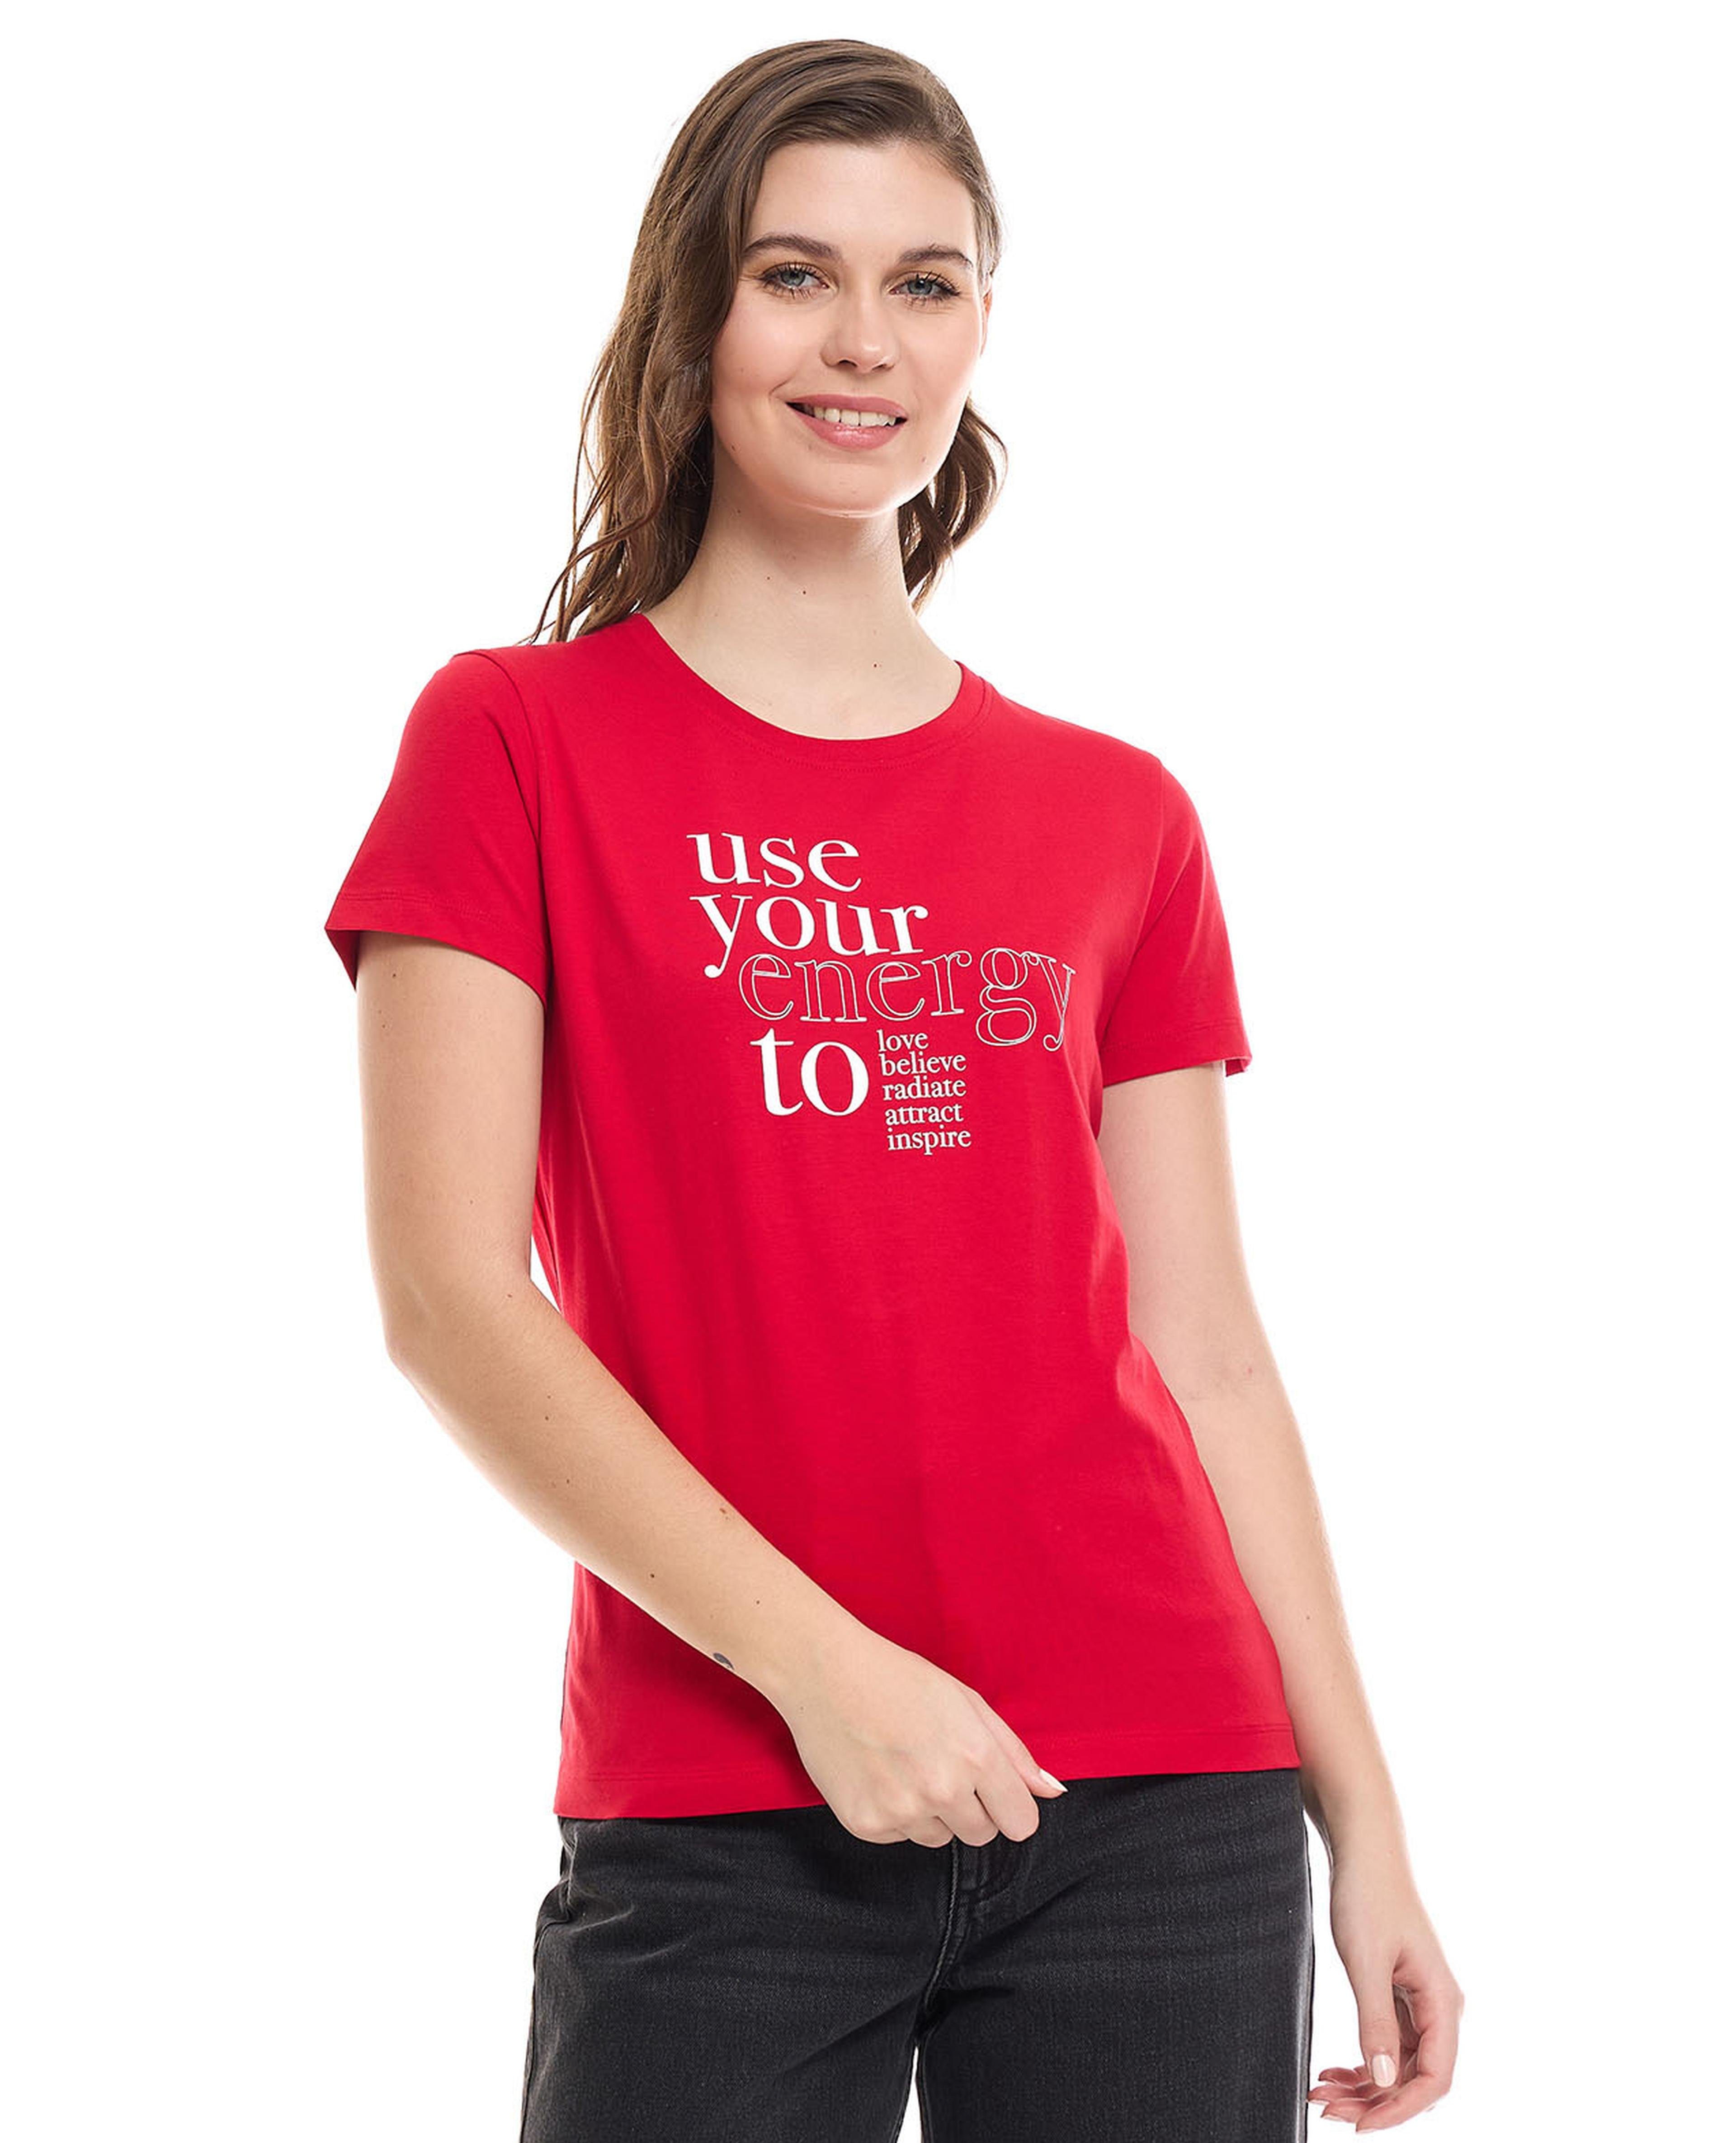 Typography Print T-Shirt with Crew Neck and Short Sleeves